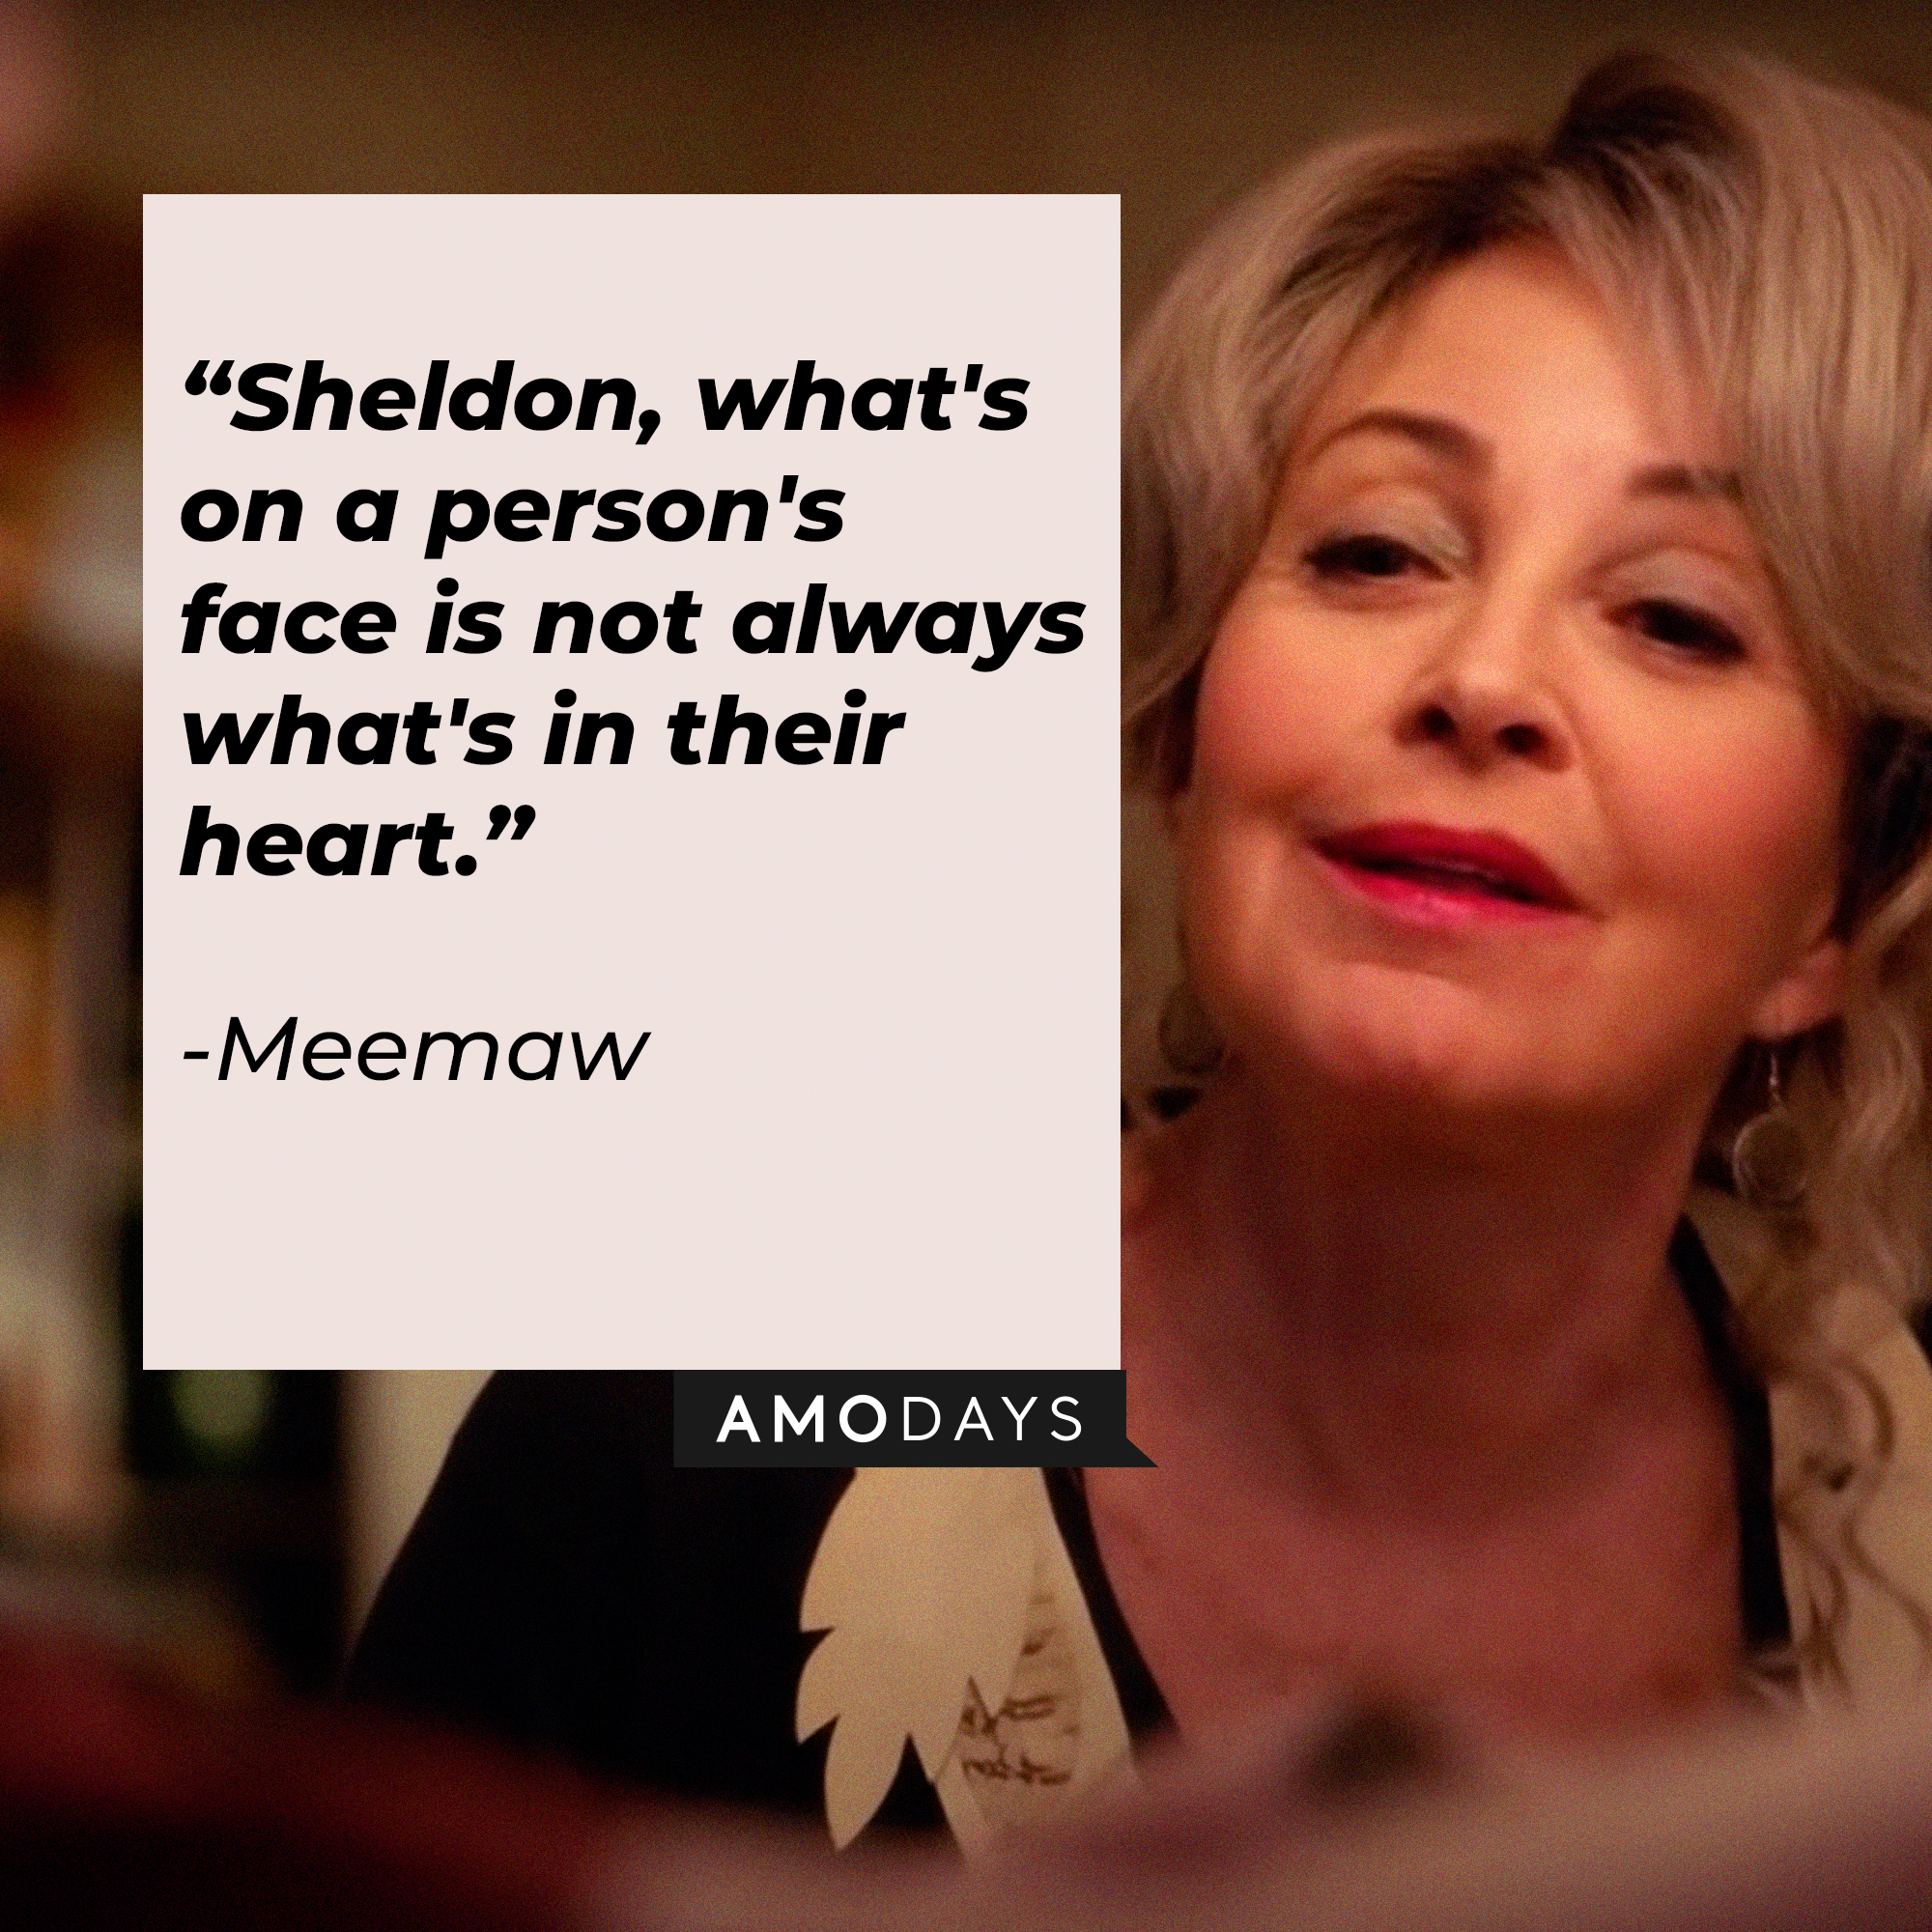 Meemaw's quote: "Sheldon, what's on a person's face is not always what's in their heart." | Source: facebook.com/YoungSheldonCBS